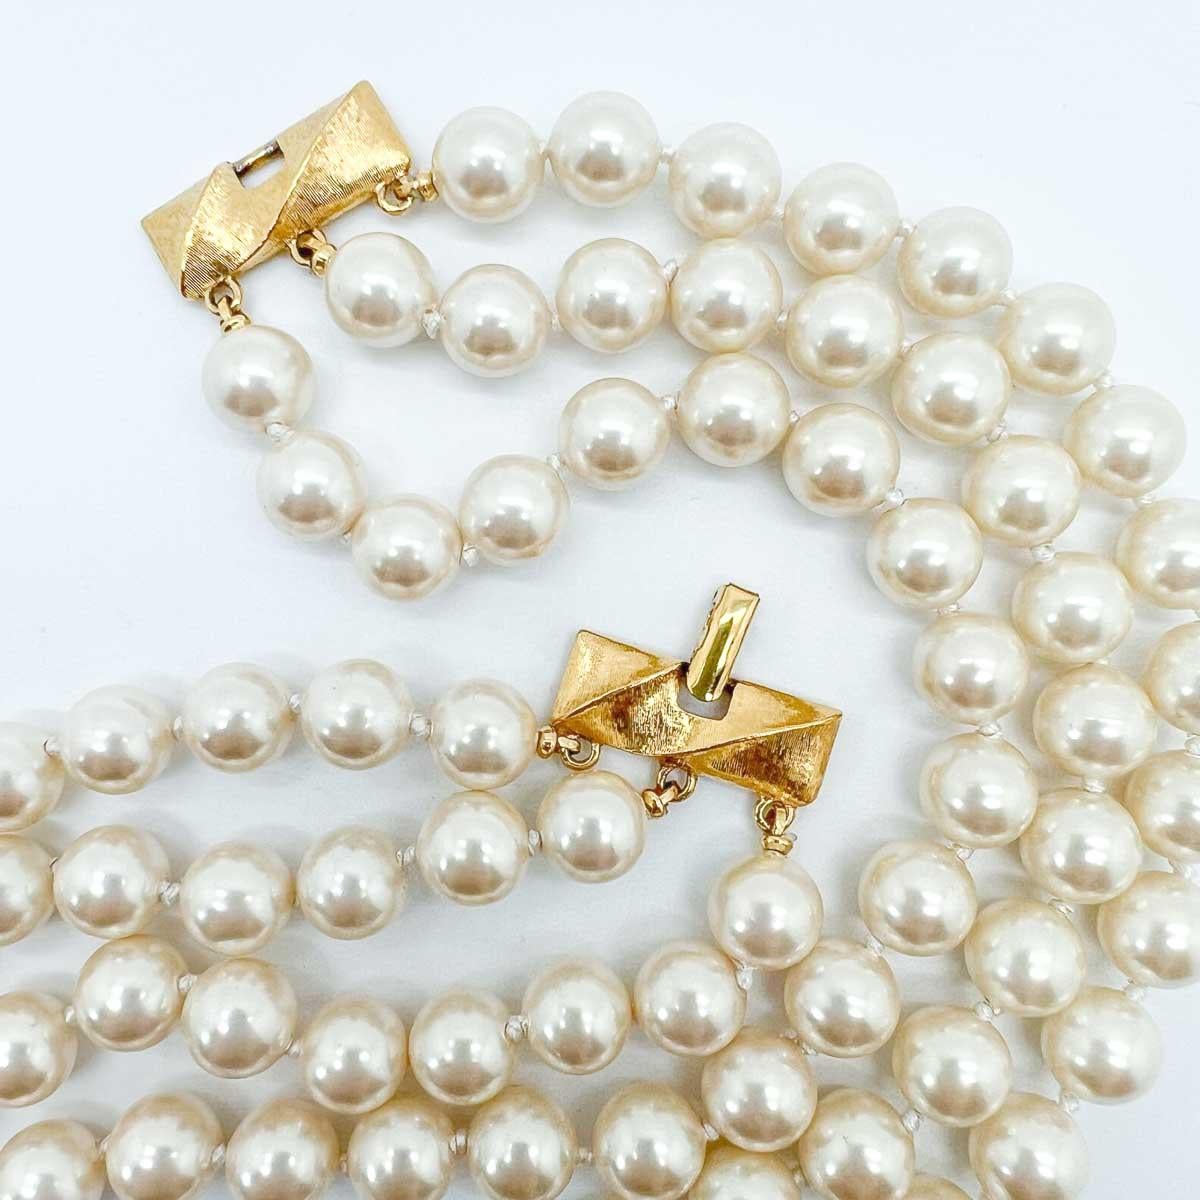 A vintage Monet Pearl Necklace. The ultimate classic for your jewel box and perfect for that eternal style touch.
Originally creators of lavish gold plated monograms for women’s purses and handbags in the early 20th Century, Monet went on to become